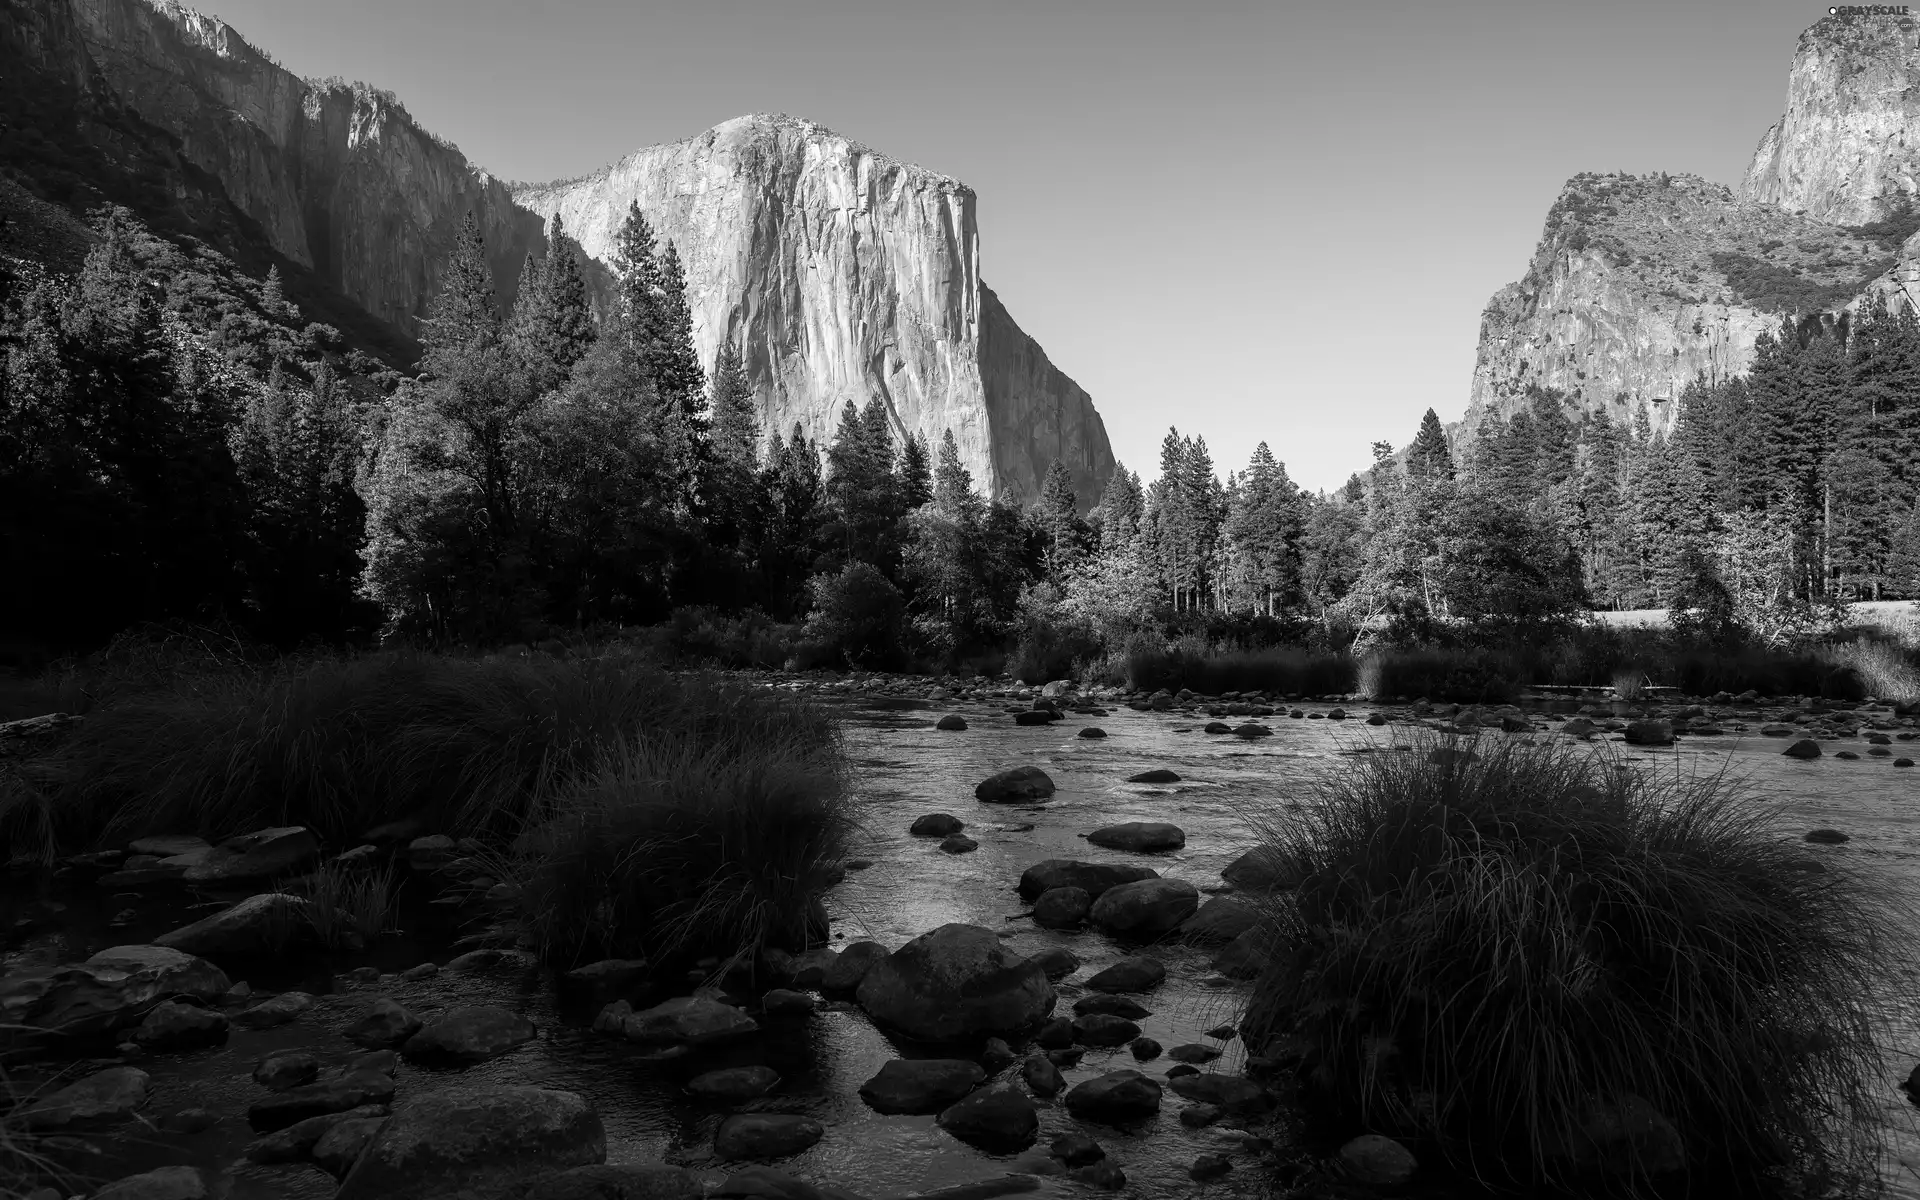 Sierra Nevada Mountains, State of California, Valley, Yosemite National Park, The United States, forest, rivers